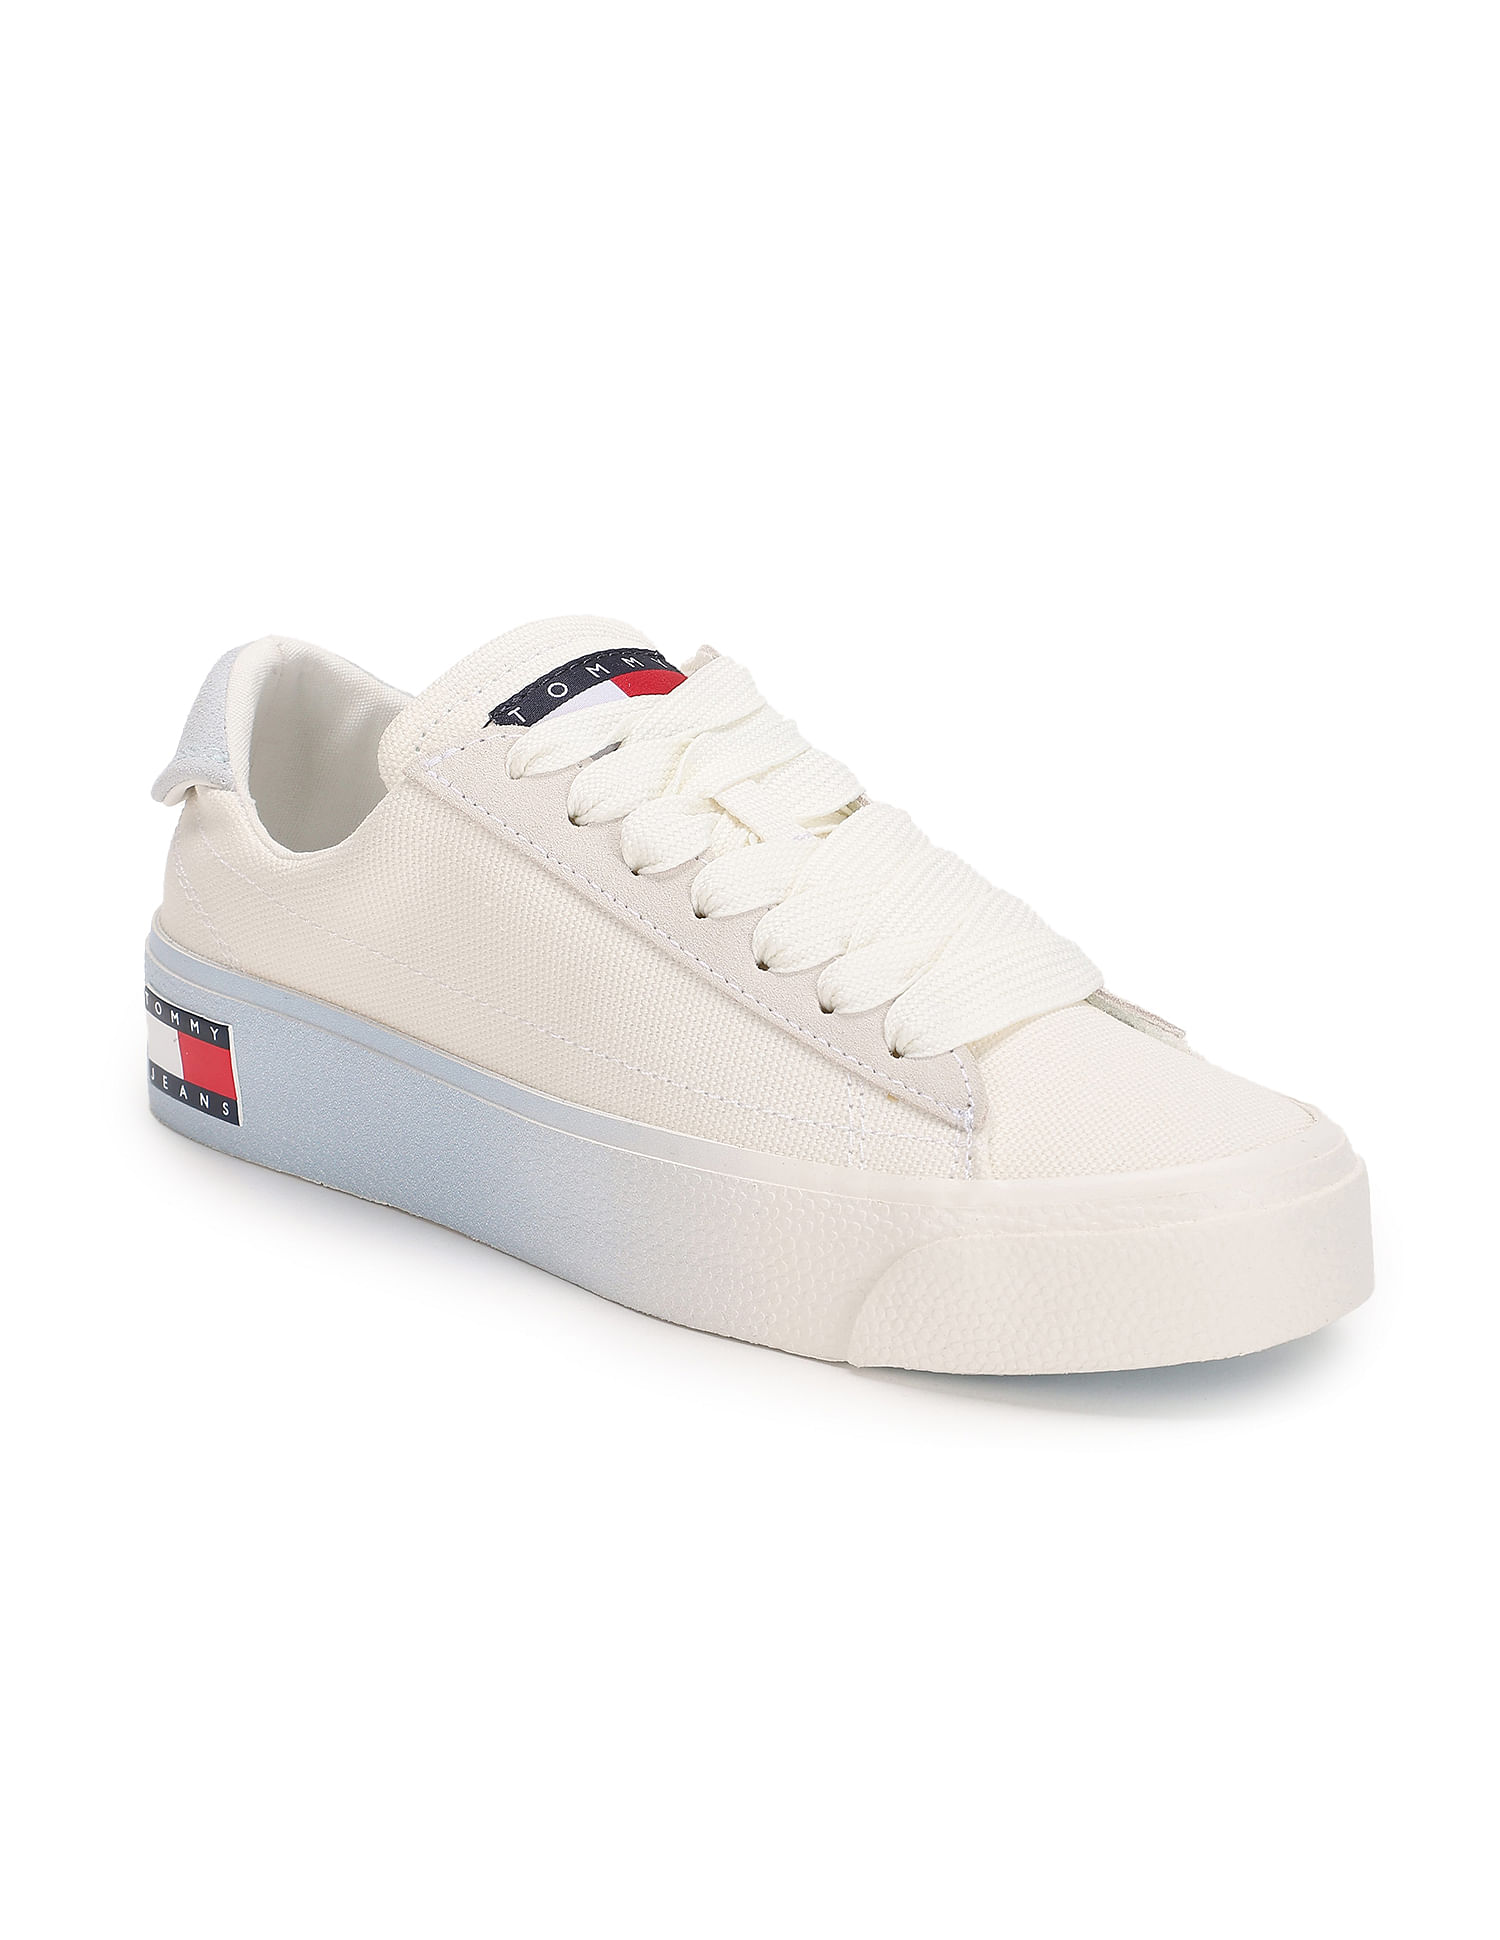 Buy Tommy Hilfiger Women Leather Flatform Sneakers - NNNOW.com